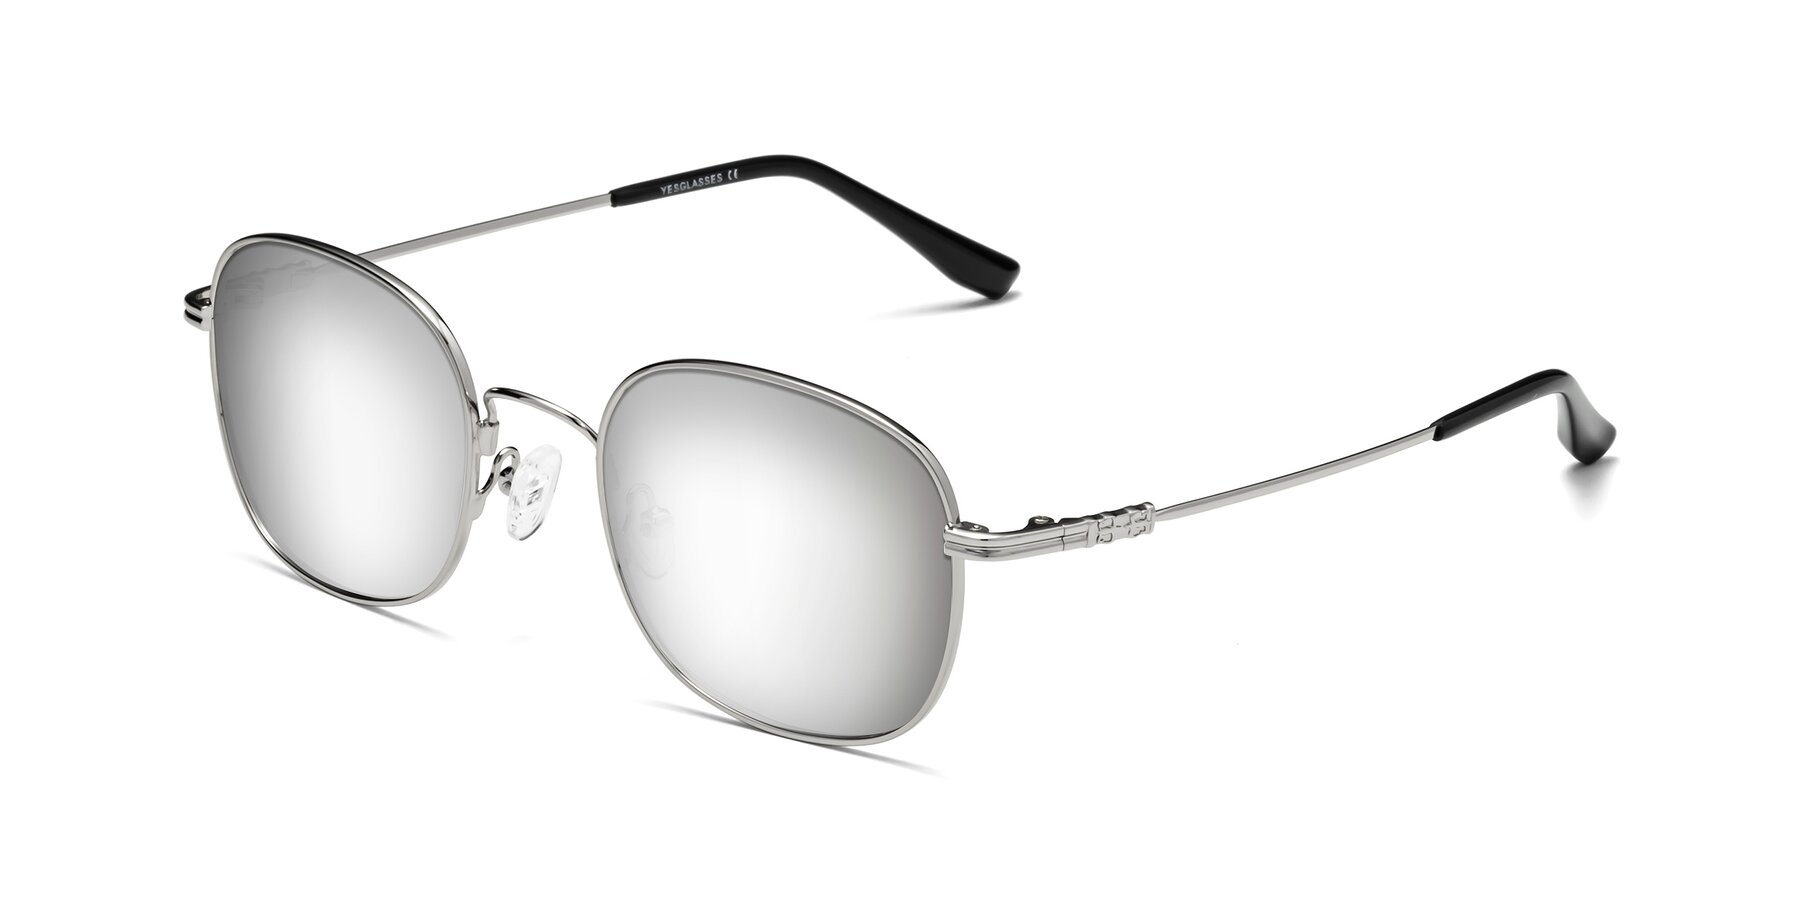 Hexagonal Sunglasses with Black Lenses and Silver Frames